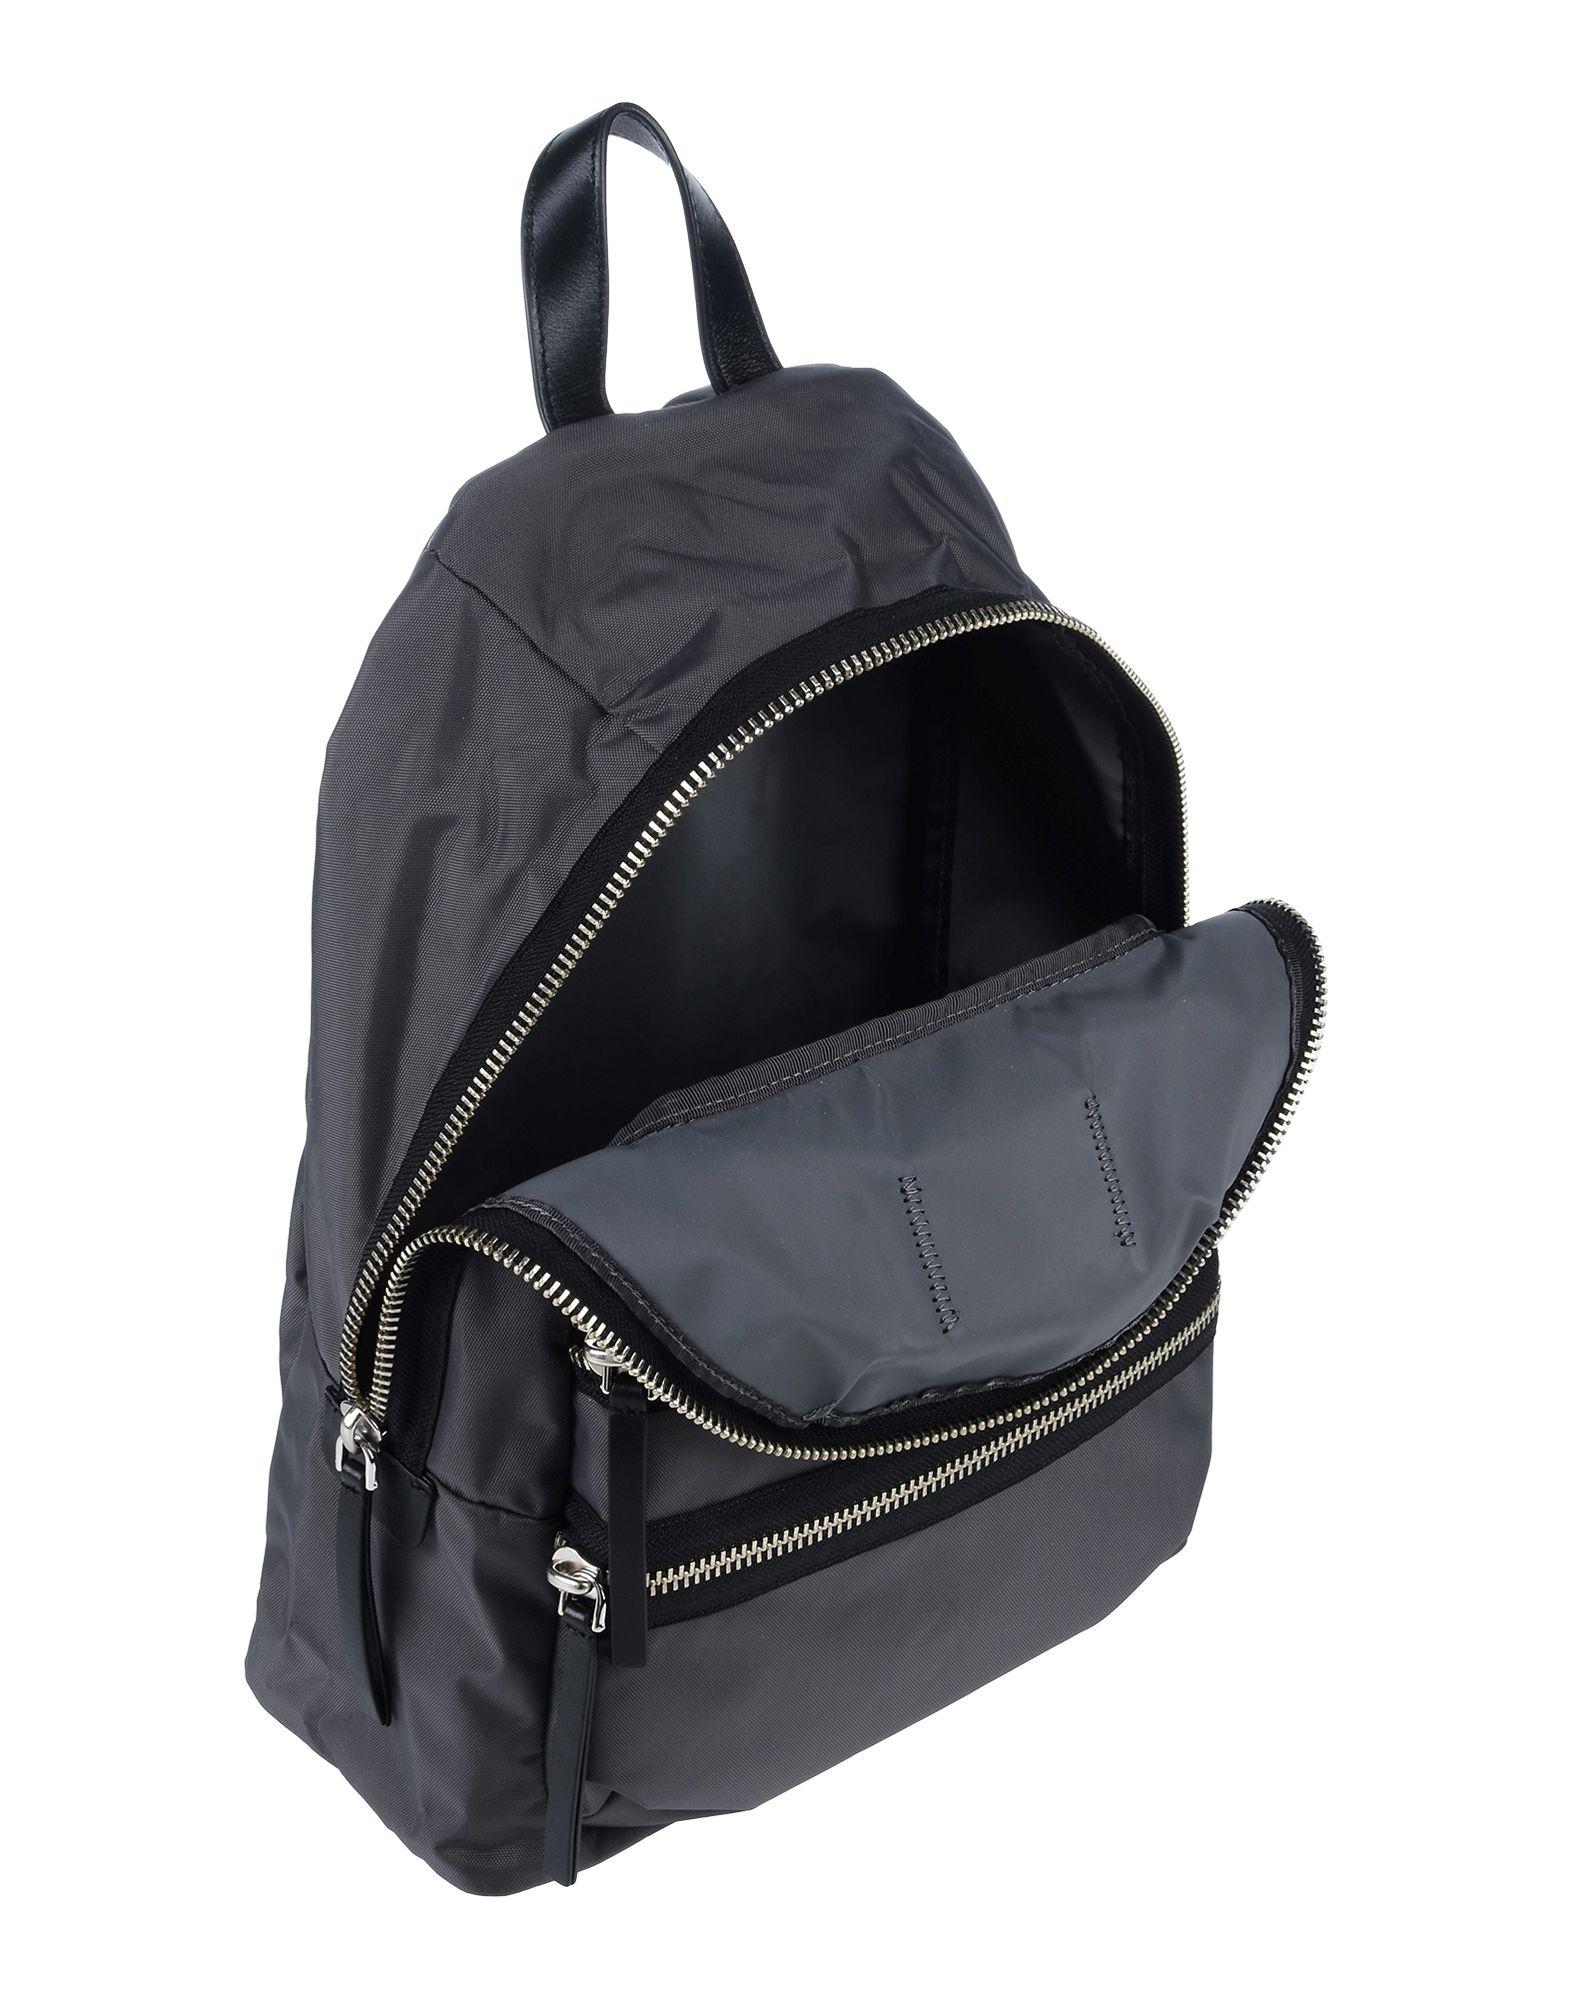 Marc Jacobs Backpacks & Bum Bags in Gray for Men - Lyst